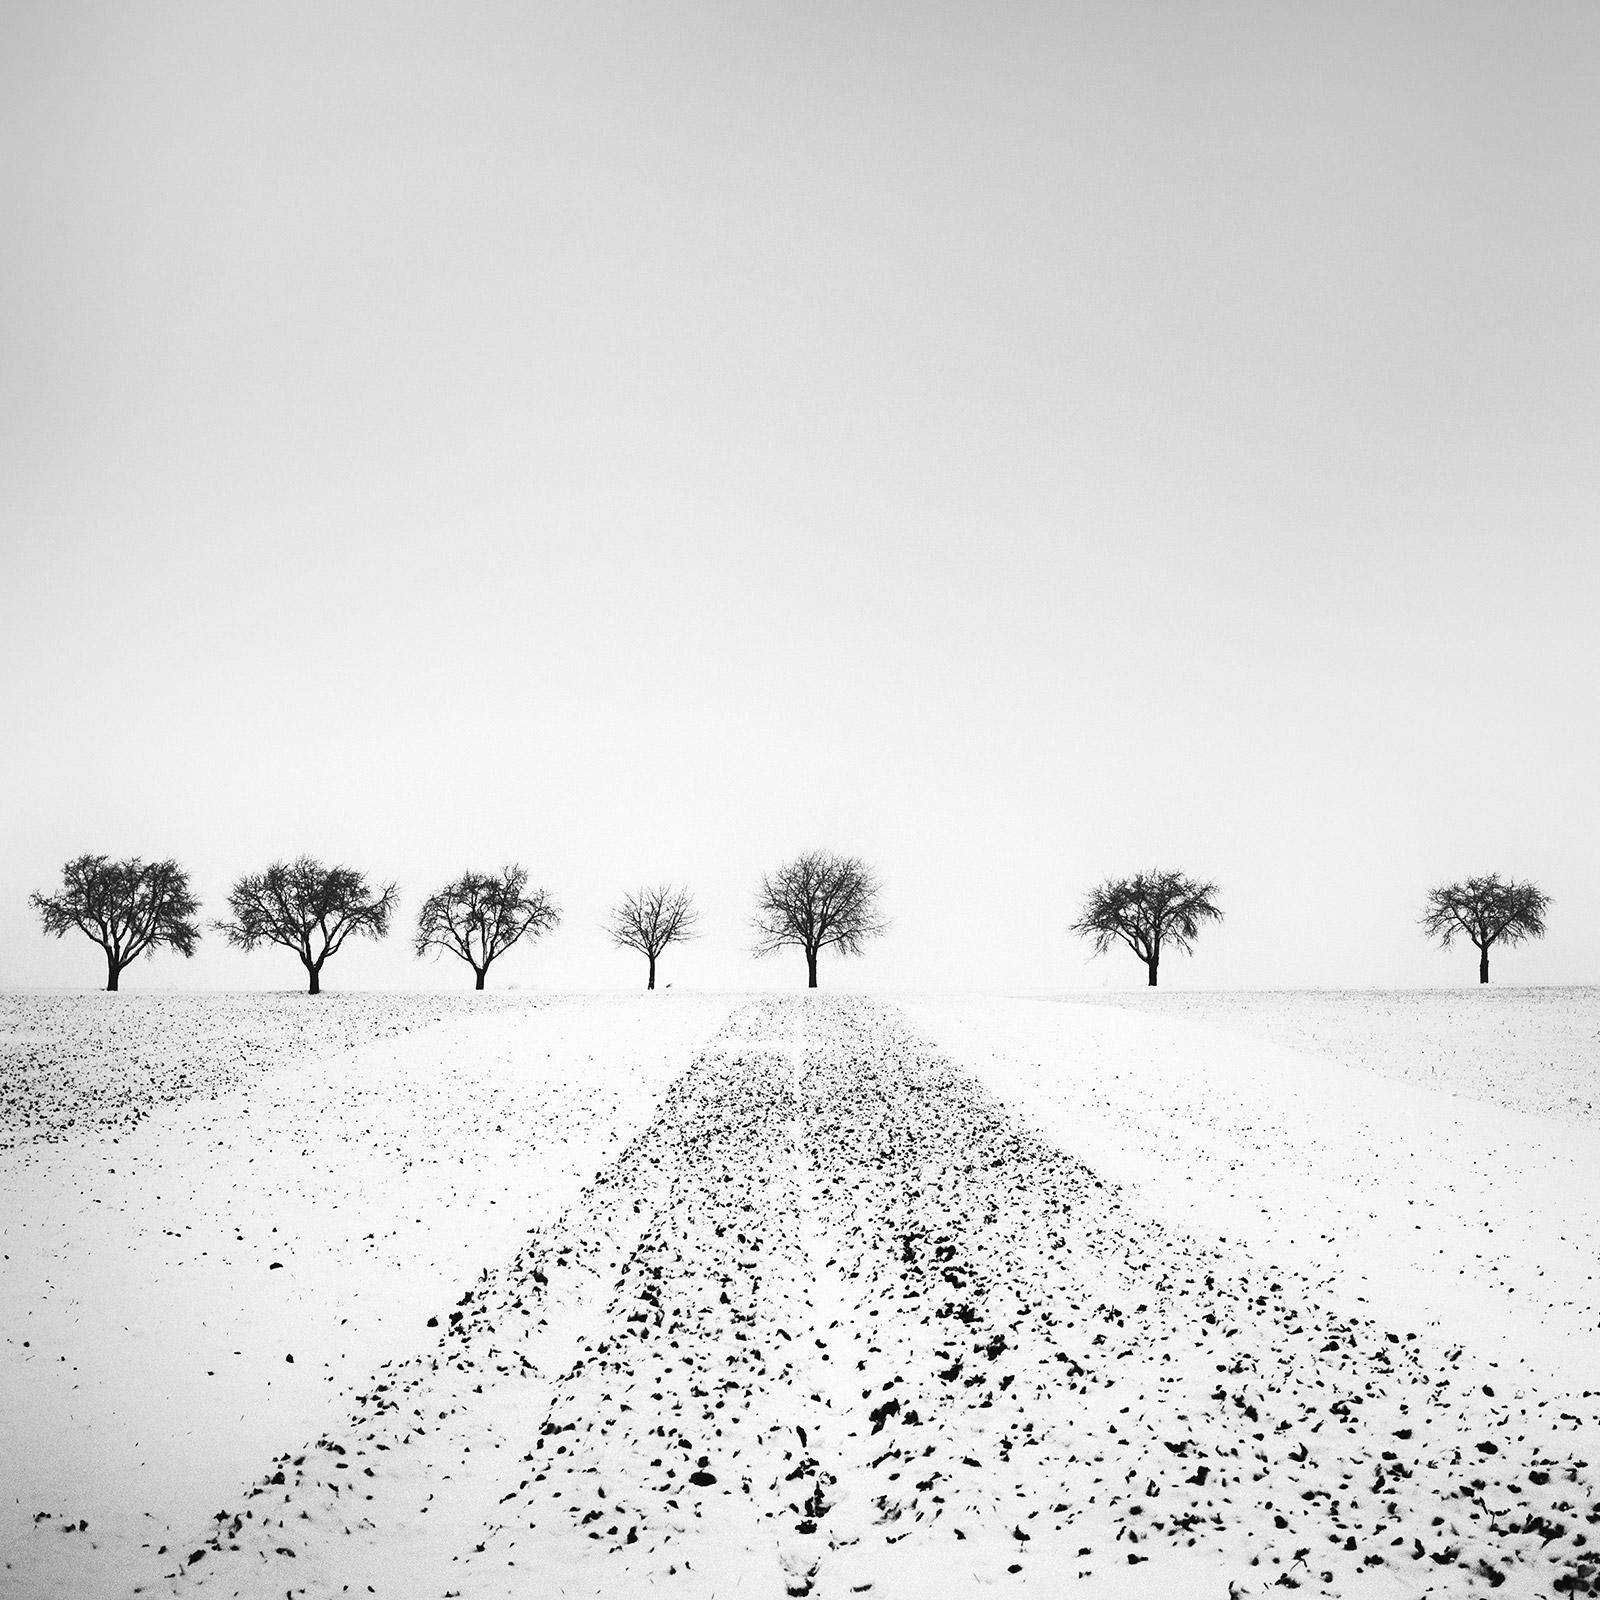 Gerald Berghammer Landscape Photograph - Trees in snowy Field, Winterland, black and white, landscape photography, print